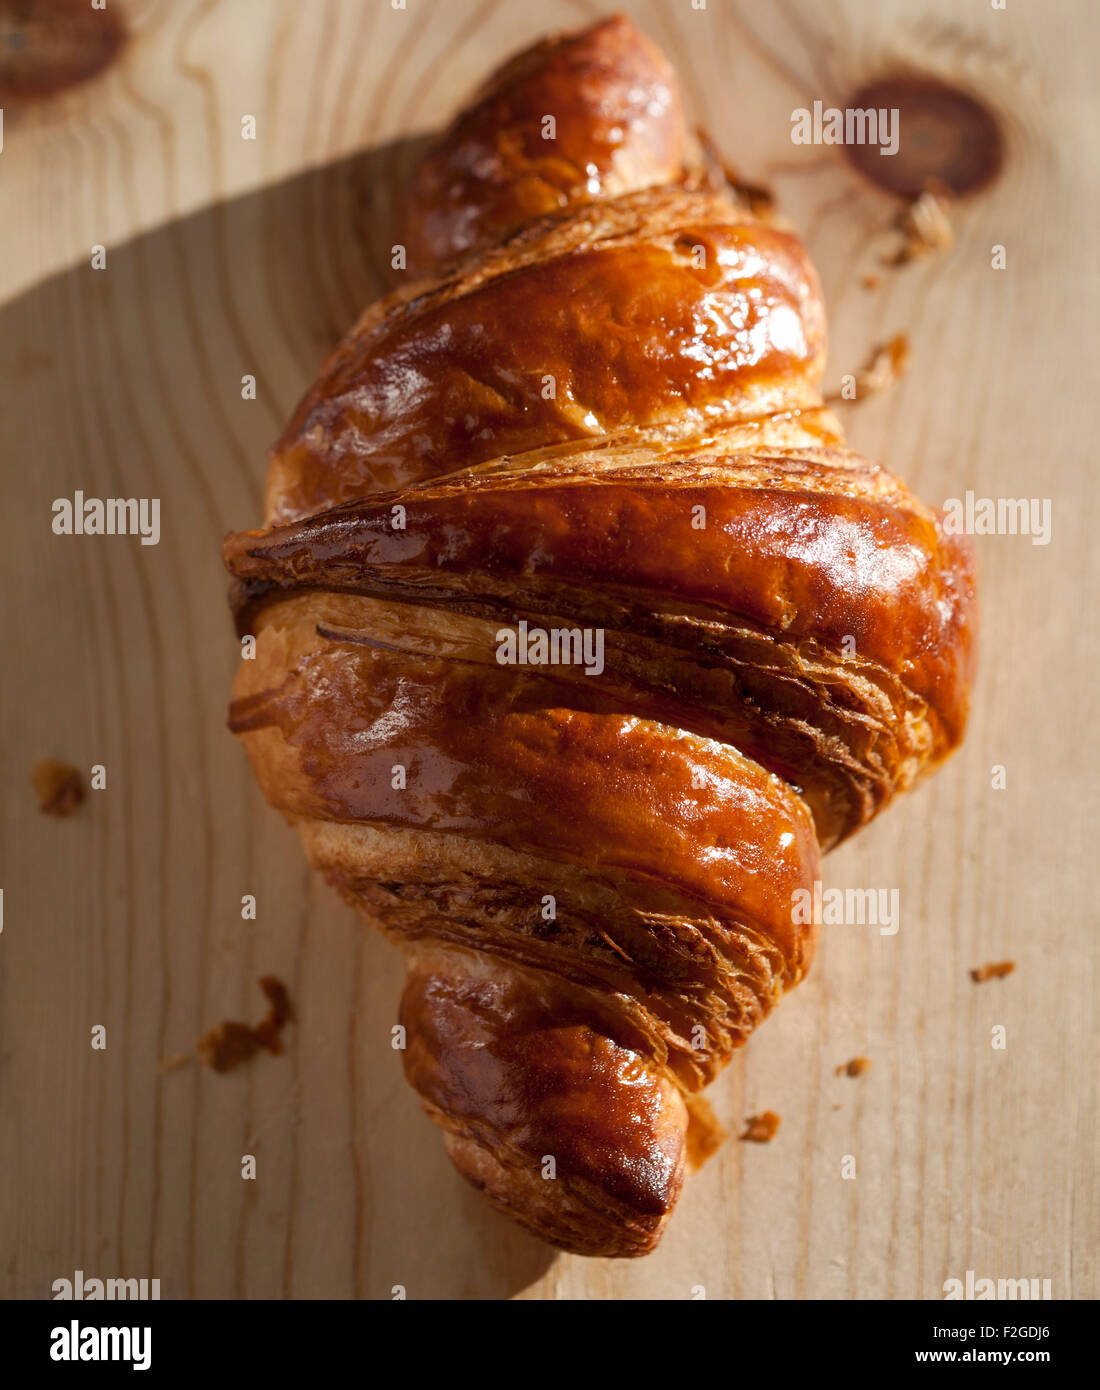 croissant in natural light Stock Photo